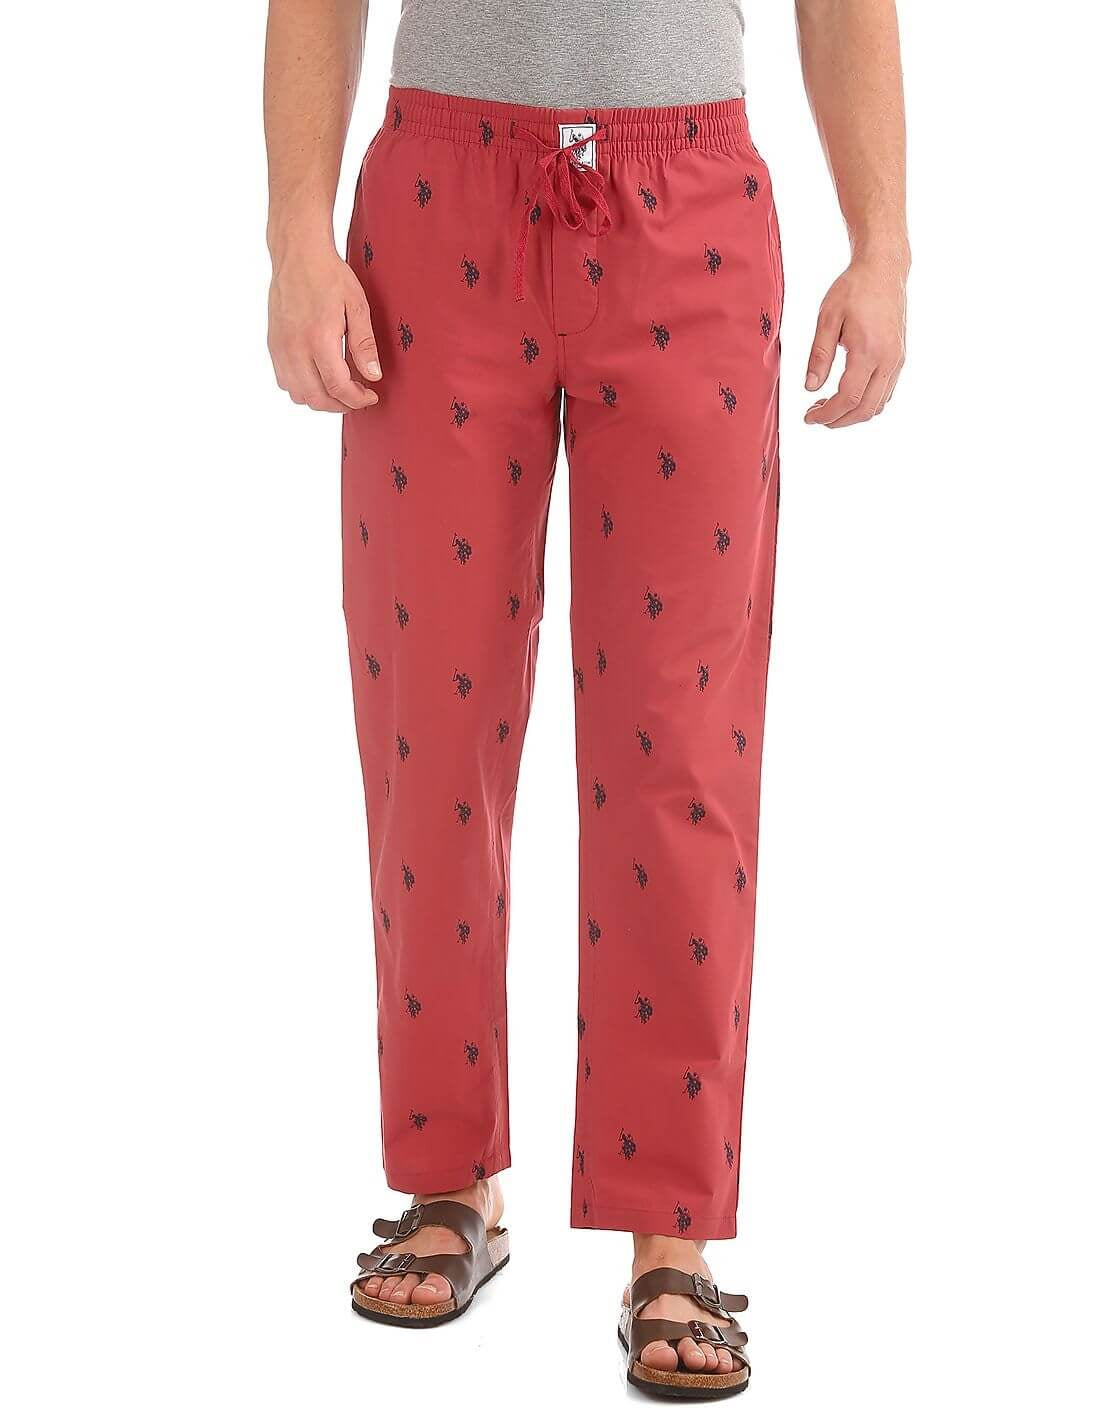 U S Polo Assn Red Printed Cotton Lounge Pants for Men #I506